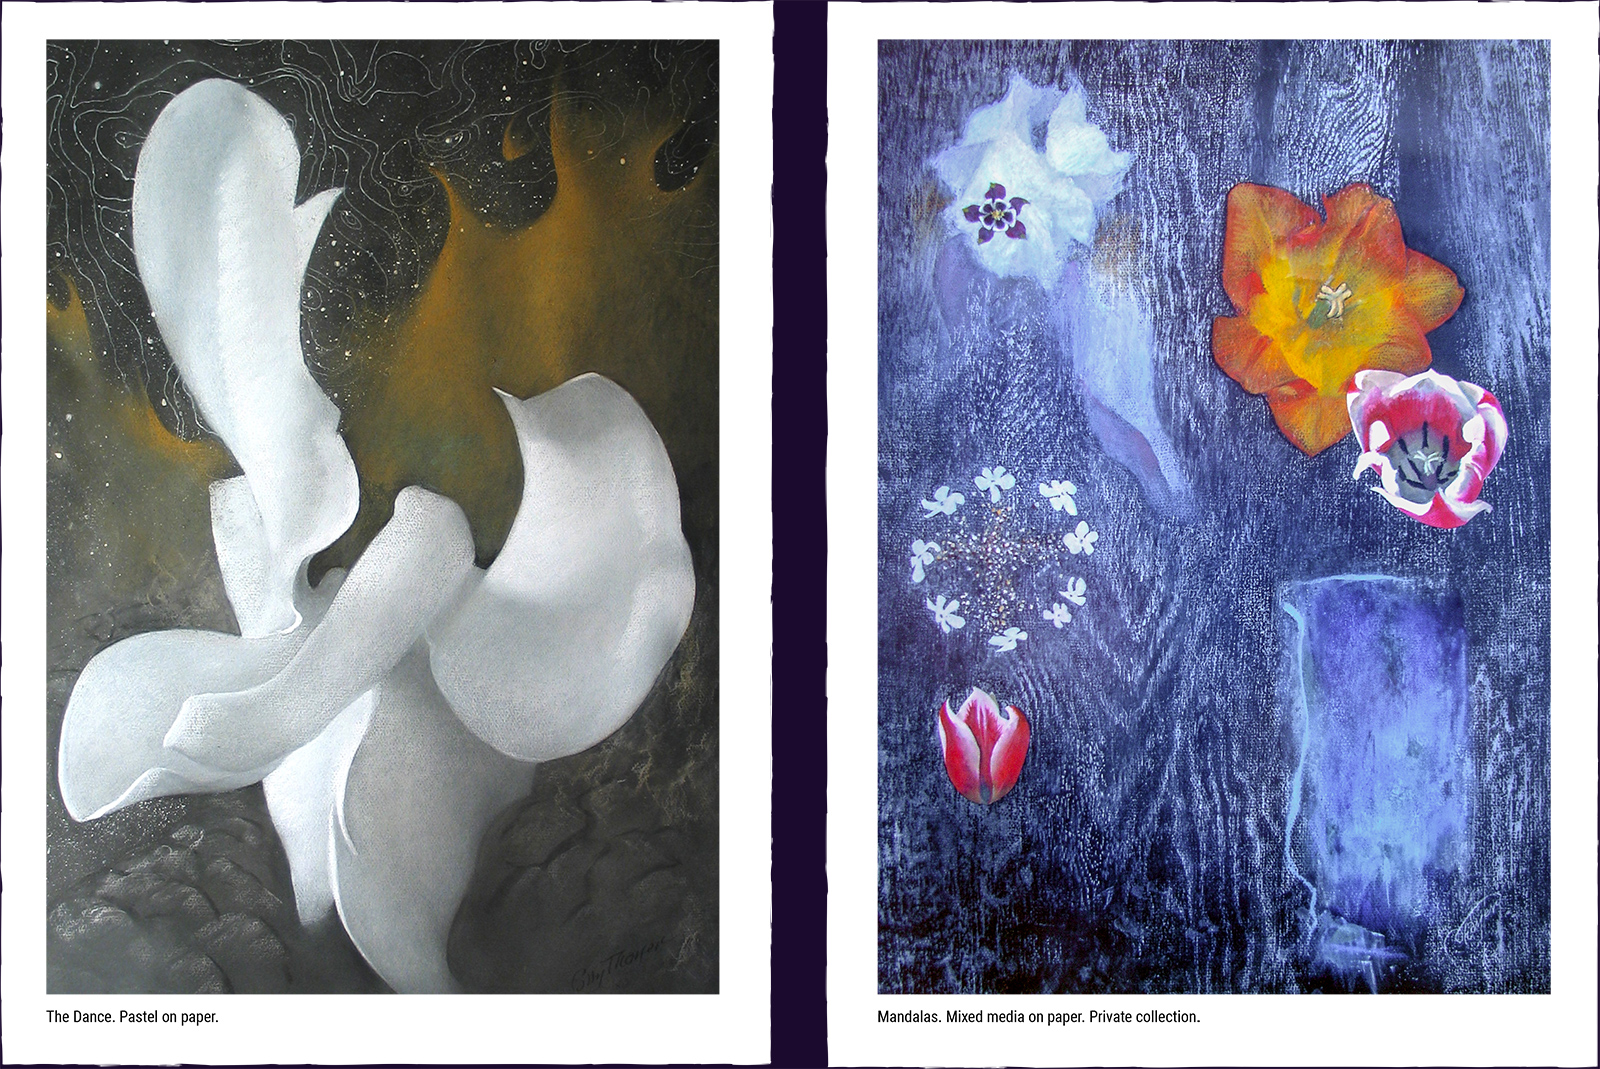 Two mystery paintings. (1) The Dance. Pastel on paper. (2) Mandalas. Mixed media on paper. Private collection.